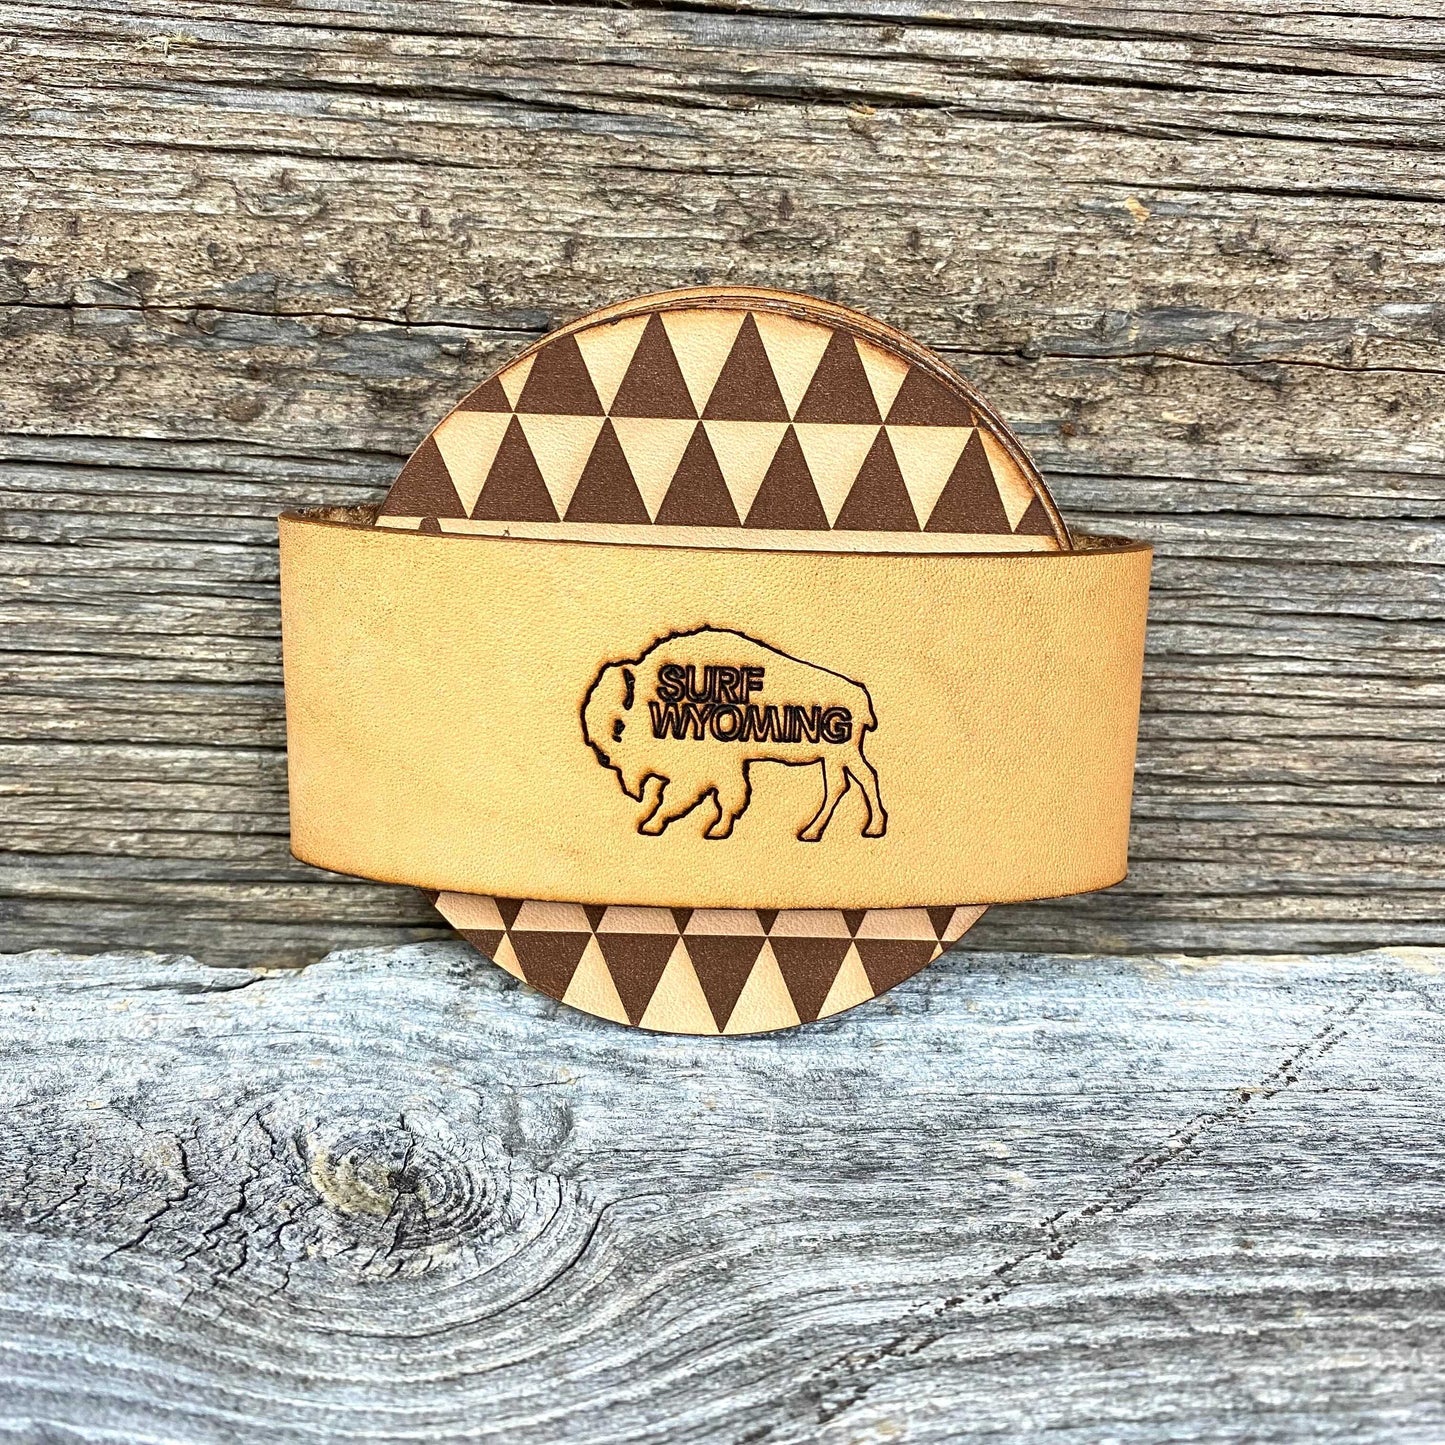 Surf Wyoming® Leather Coasters - Set of 4